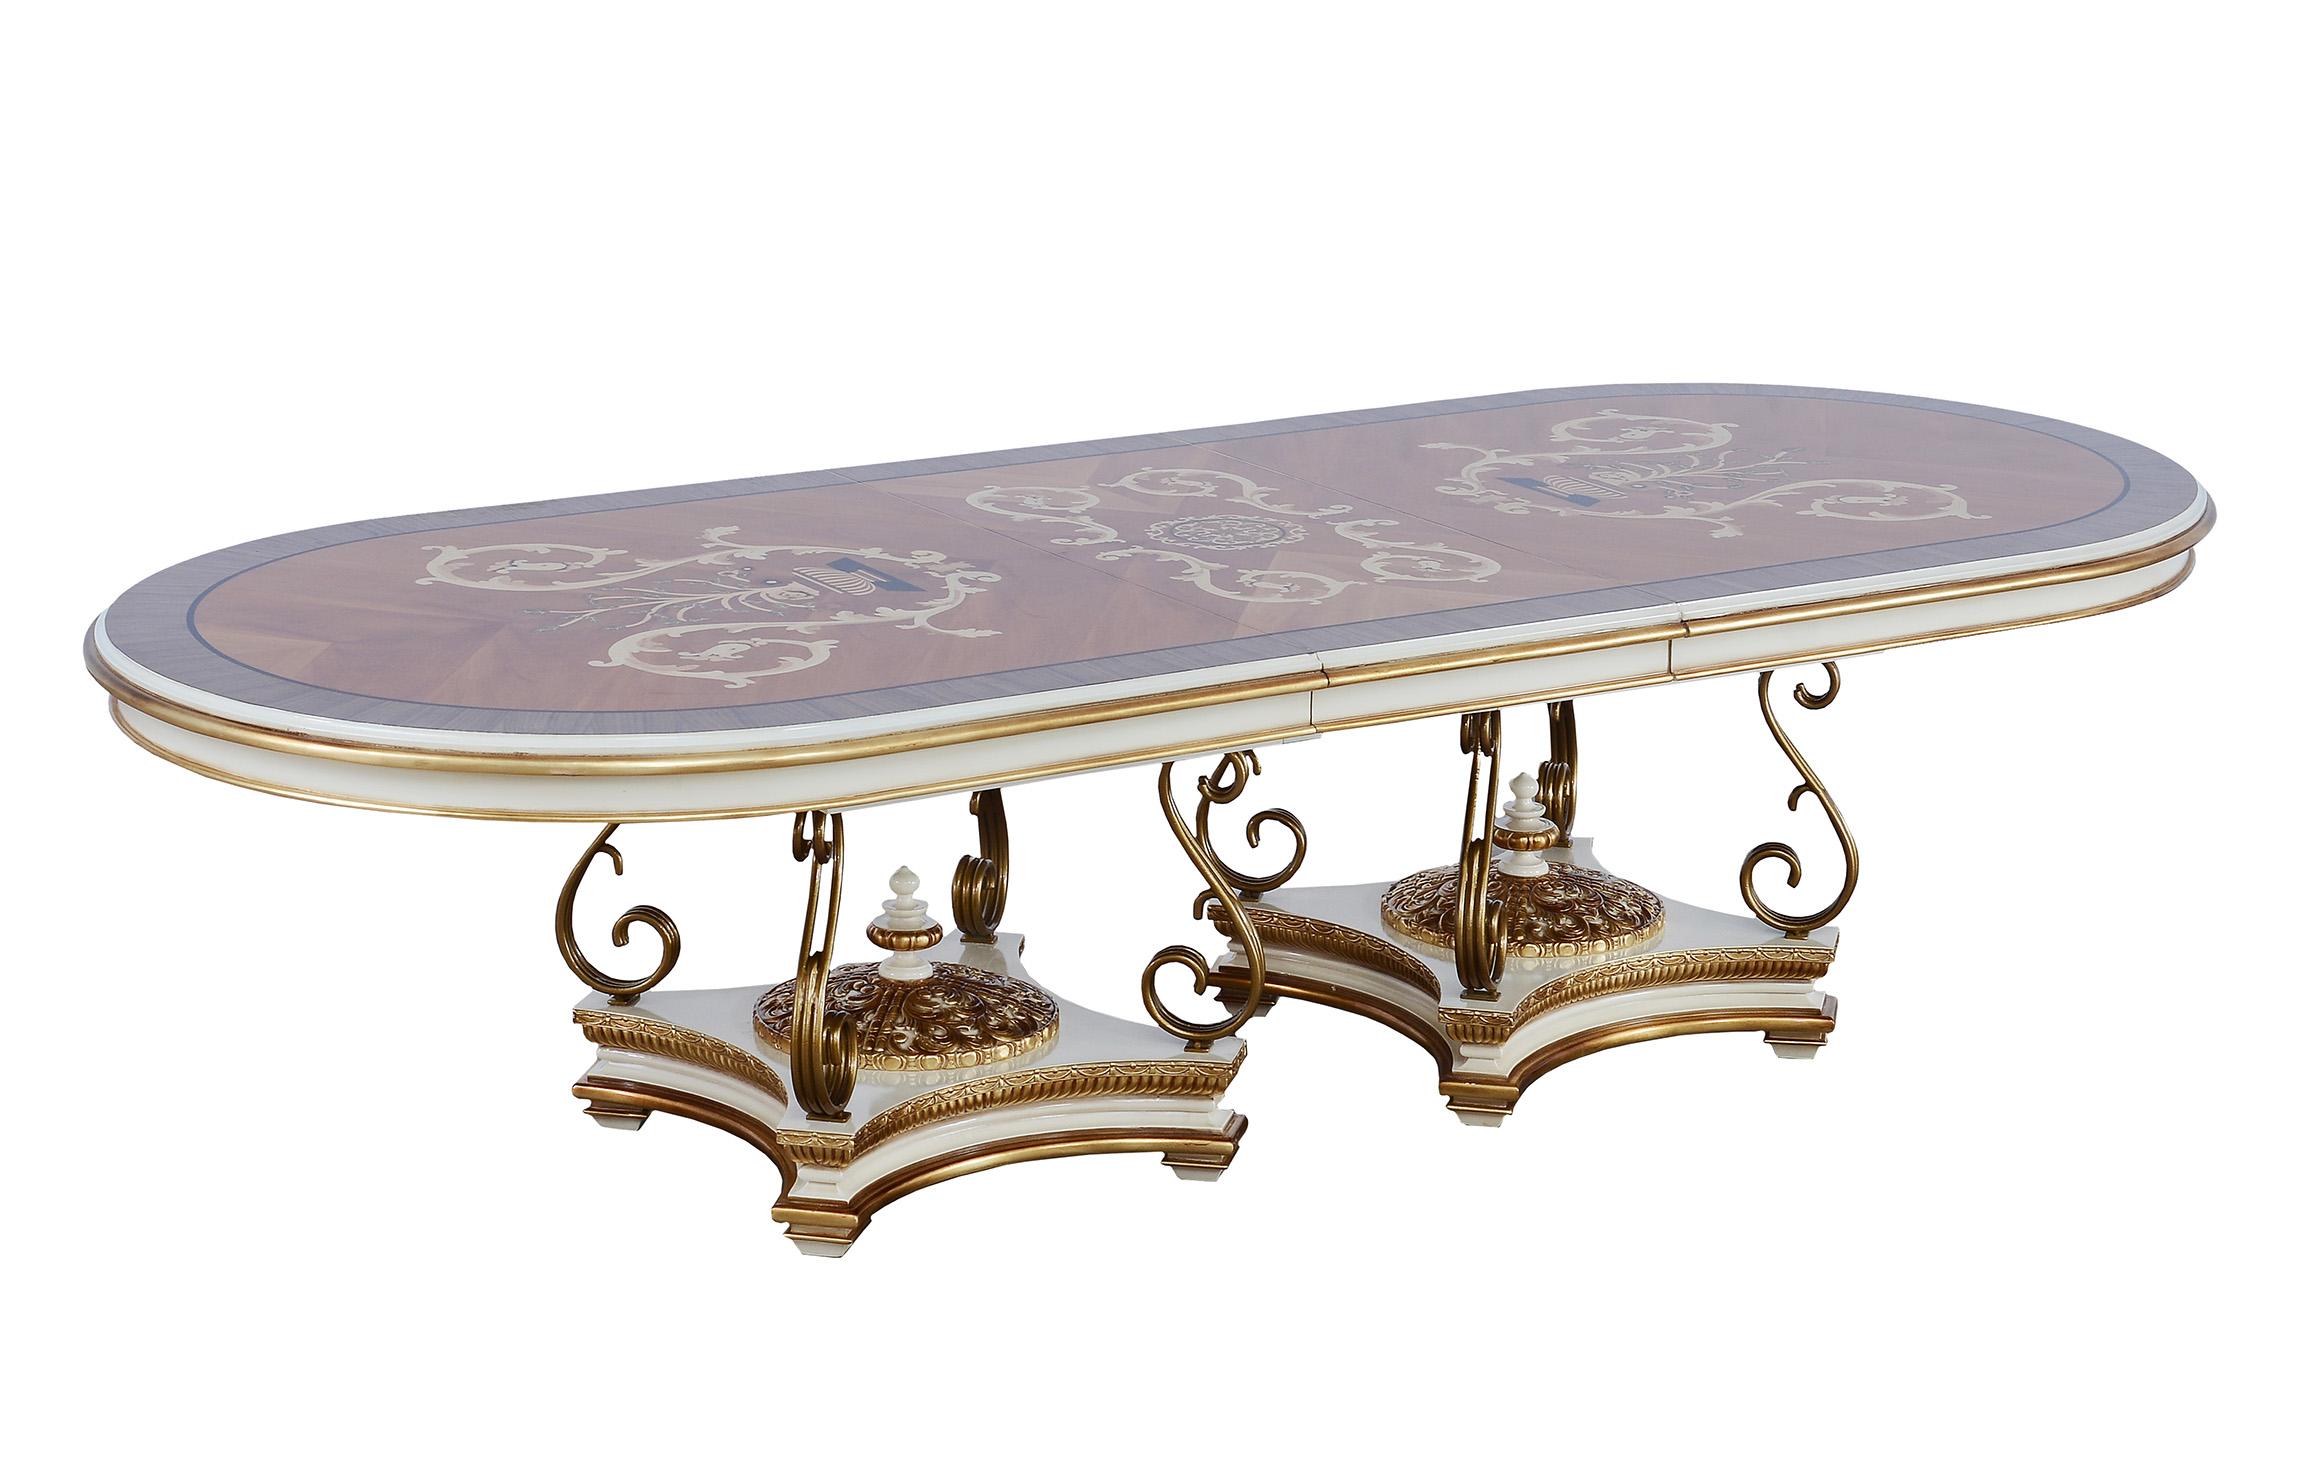 Classic, Traditional Oval Table VALENTINA 51959-DT in Beige 